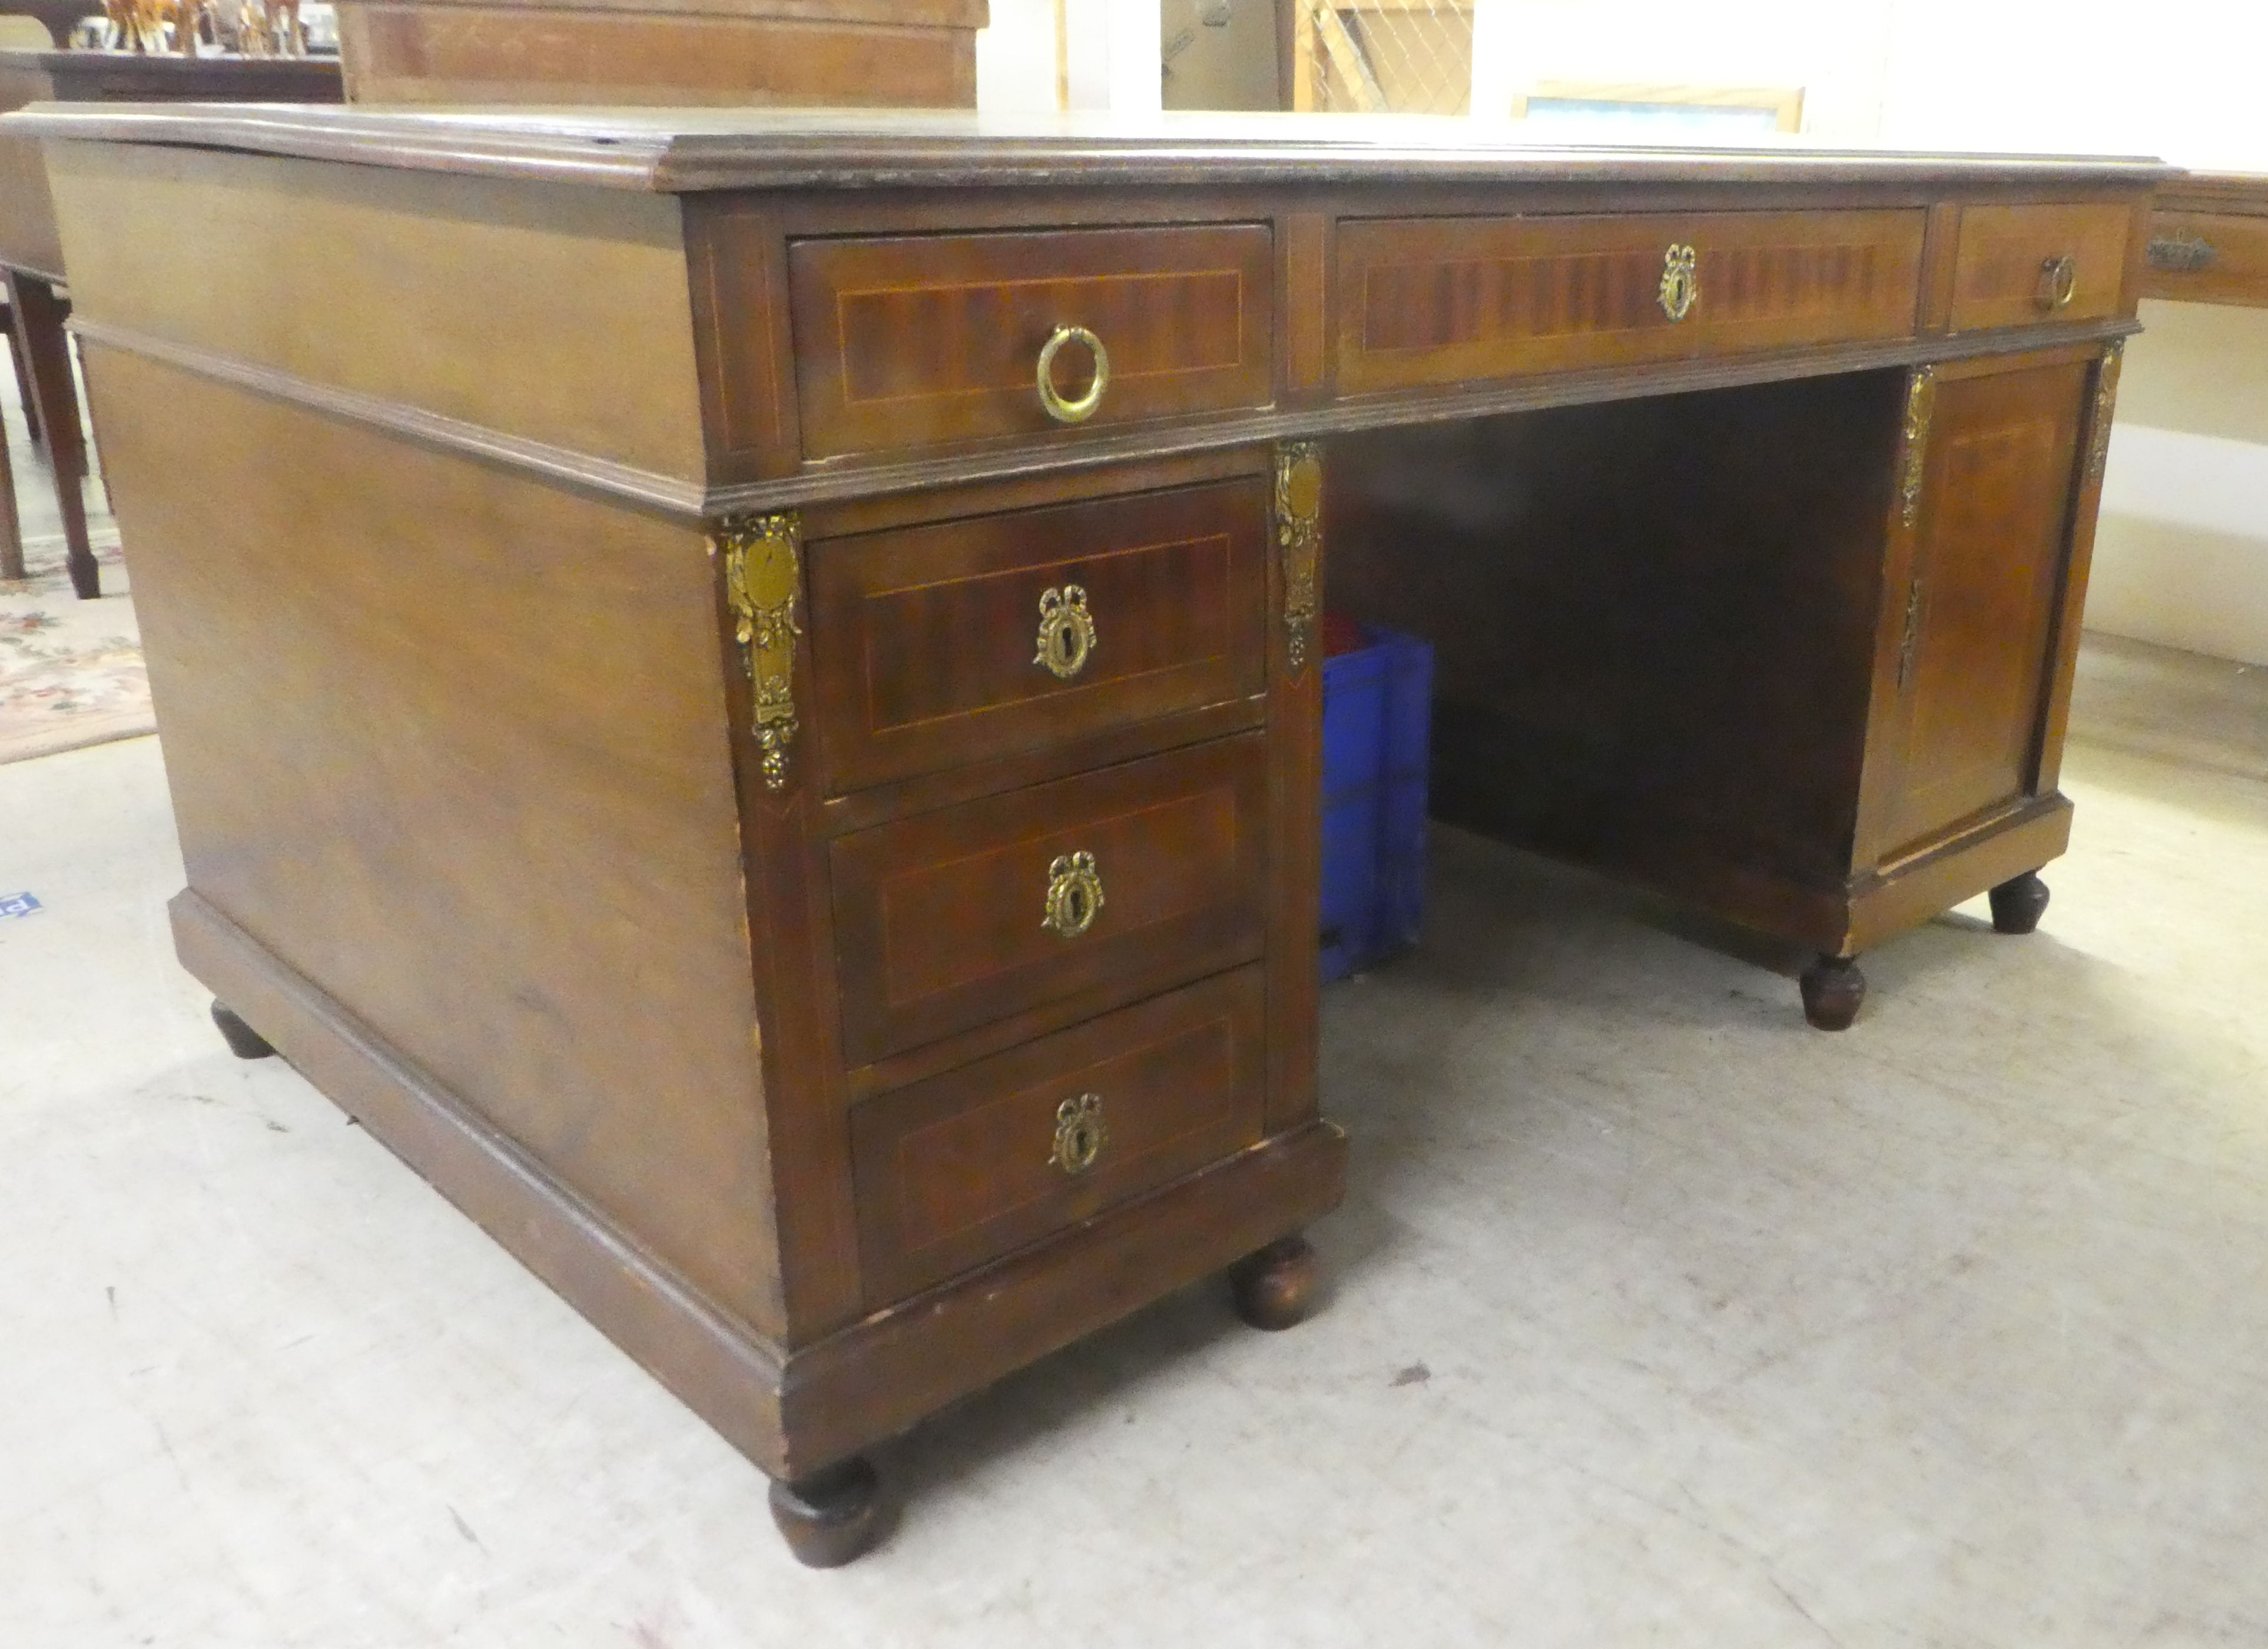 An early 20thC string inlaid mahogany, twin pedestal partner's desk with an arrangement of drawers